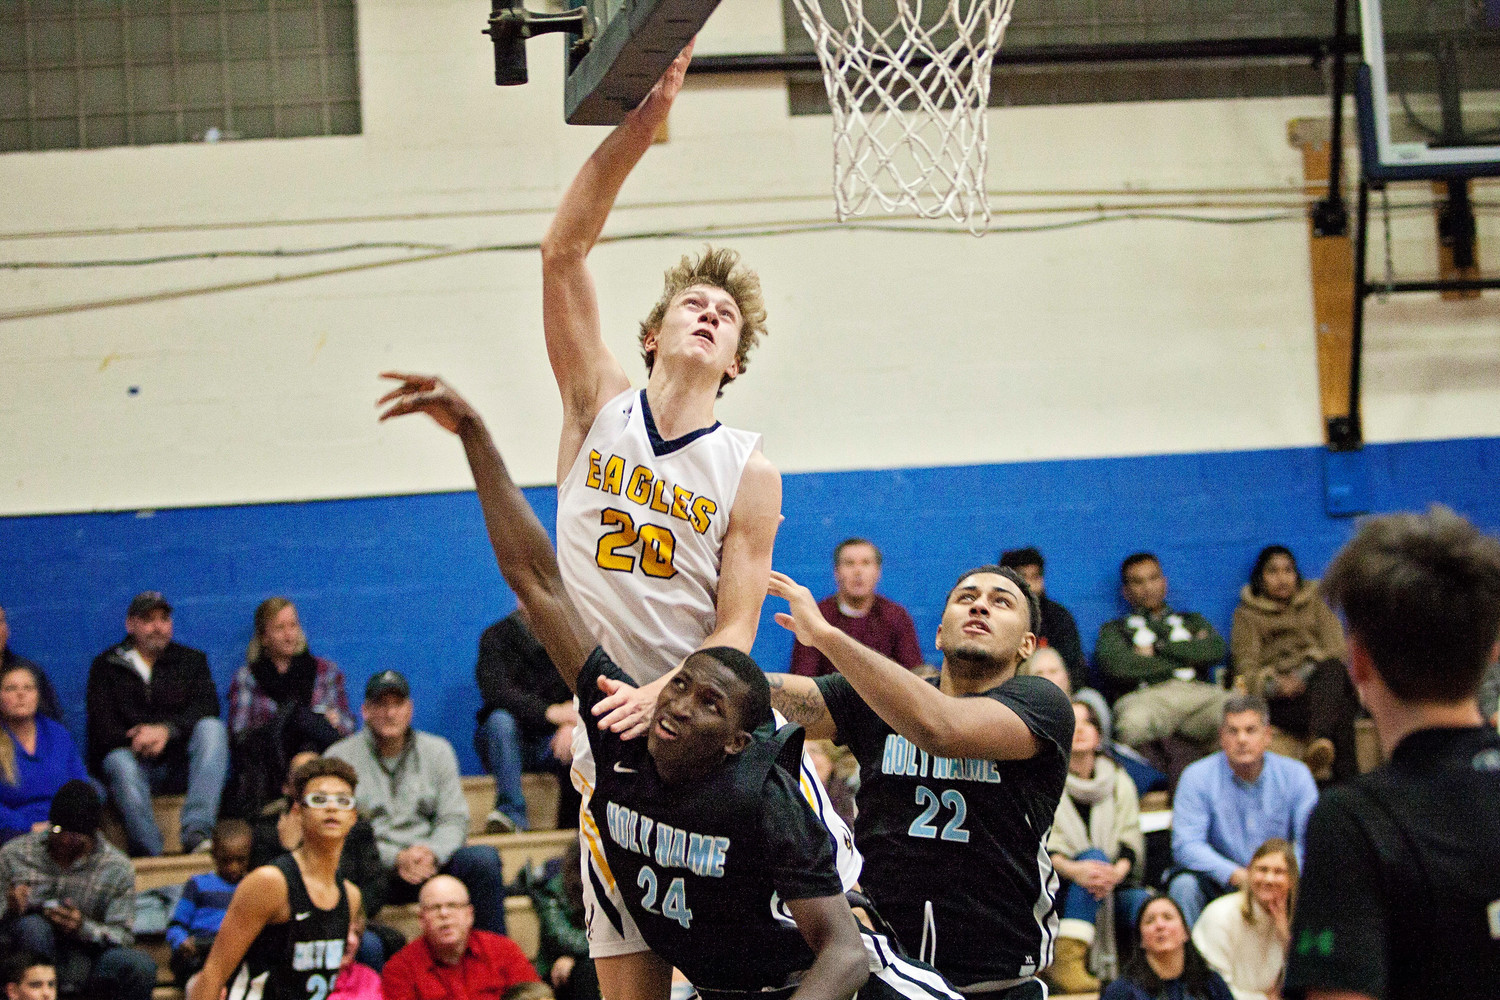 Deven Connors elevates over a pair of Holy Name defenders during the Eagles' 70-55 win over Wednesday night.